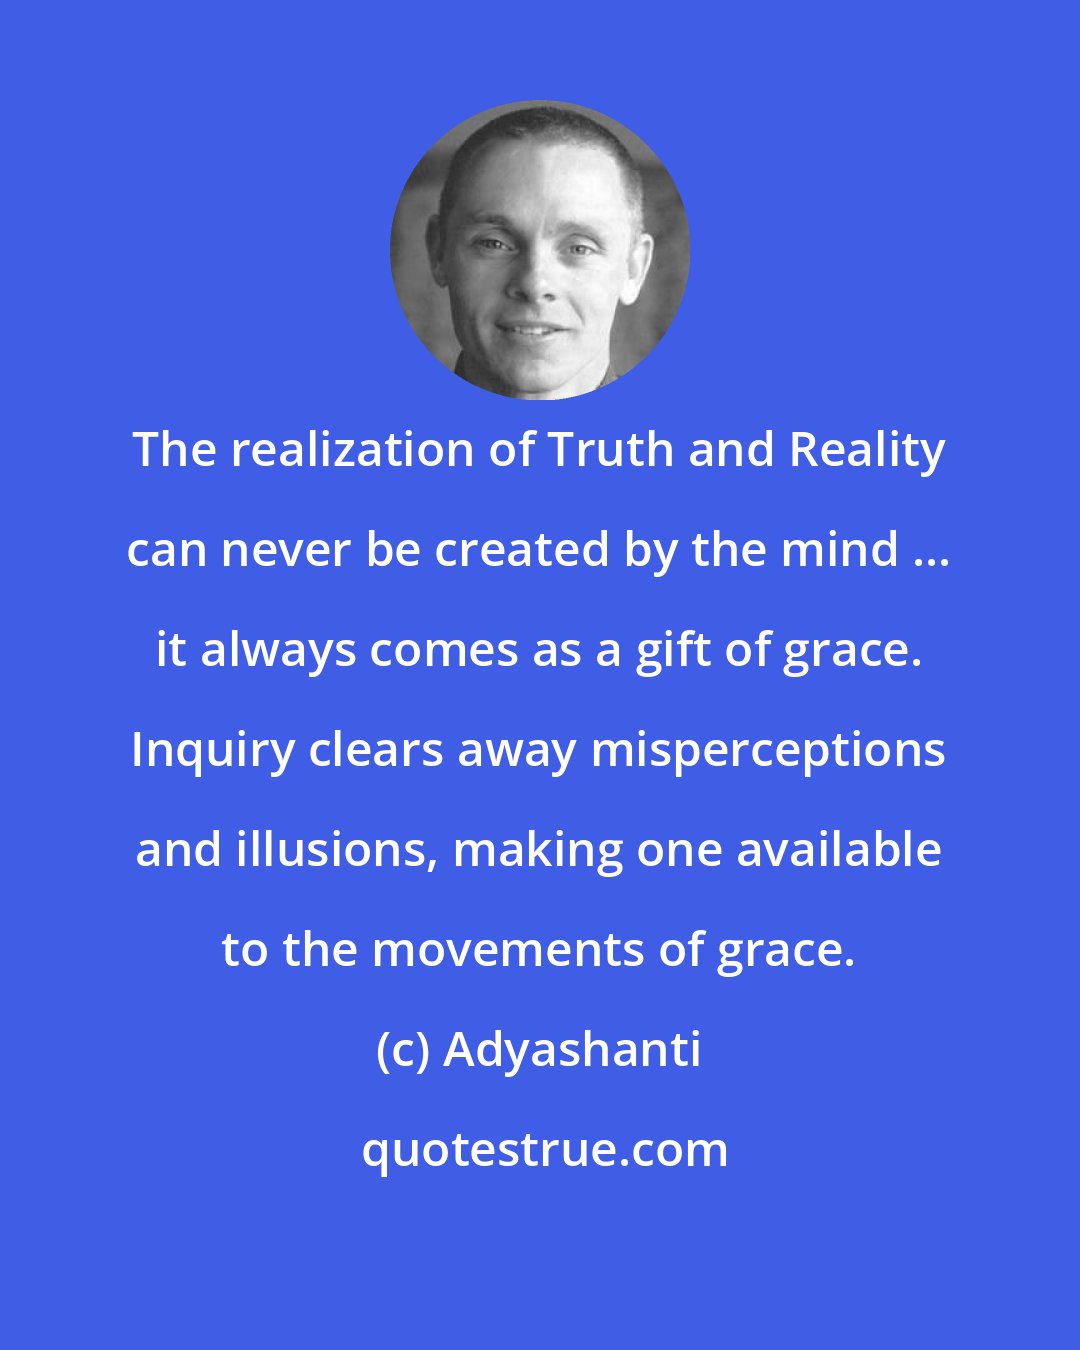 Adyashanti: The realization of Truth and Reality can never be created by the mind ... it always comes as a gift of grace. Inquiry clears away misperceptions and illusions, making one available to the movements of grace.